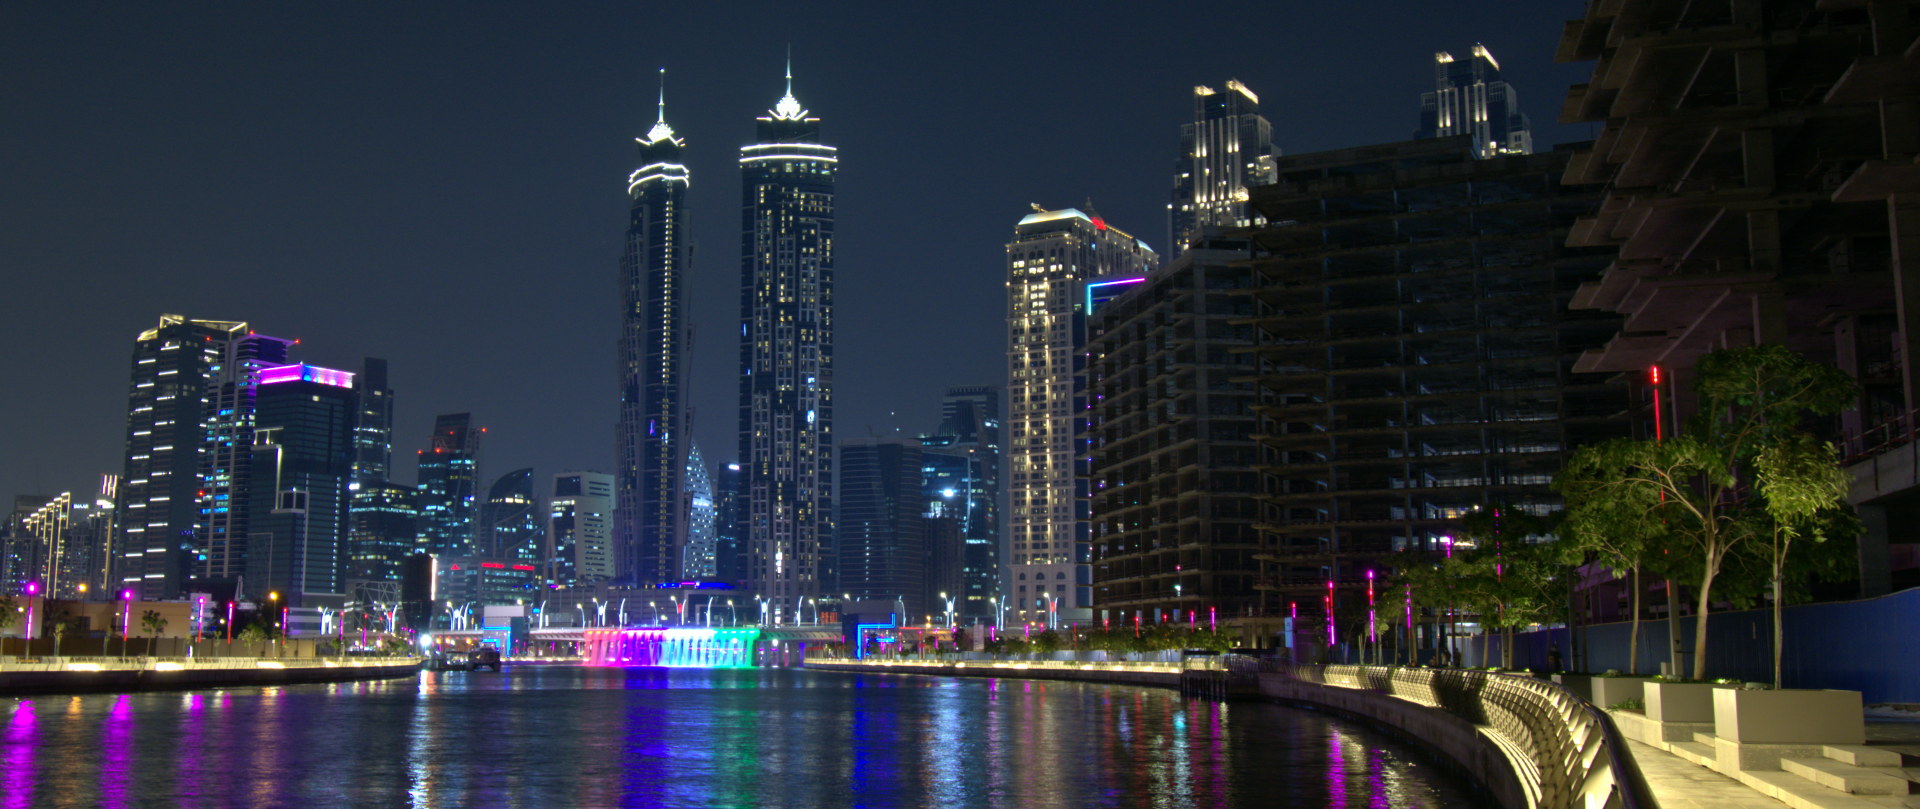 View from the Dubai Canal.